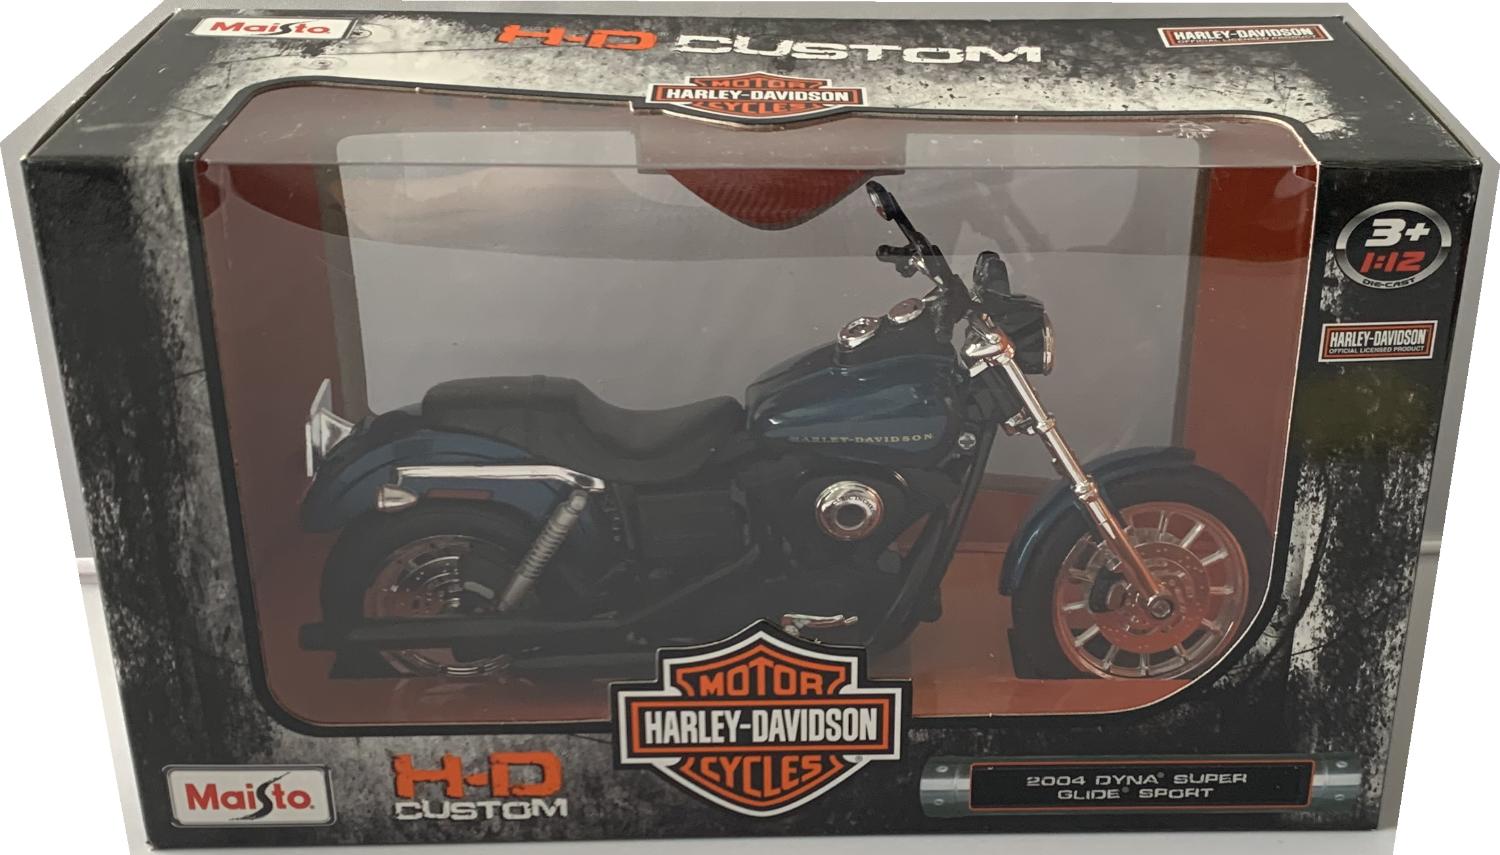 Model is presented in a Harley Davidson themed window display box